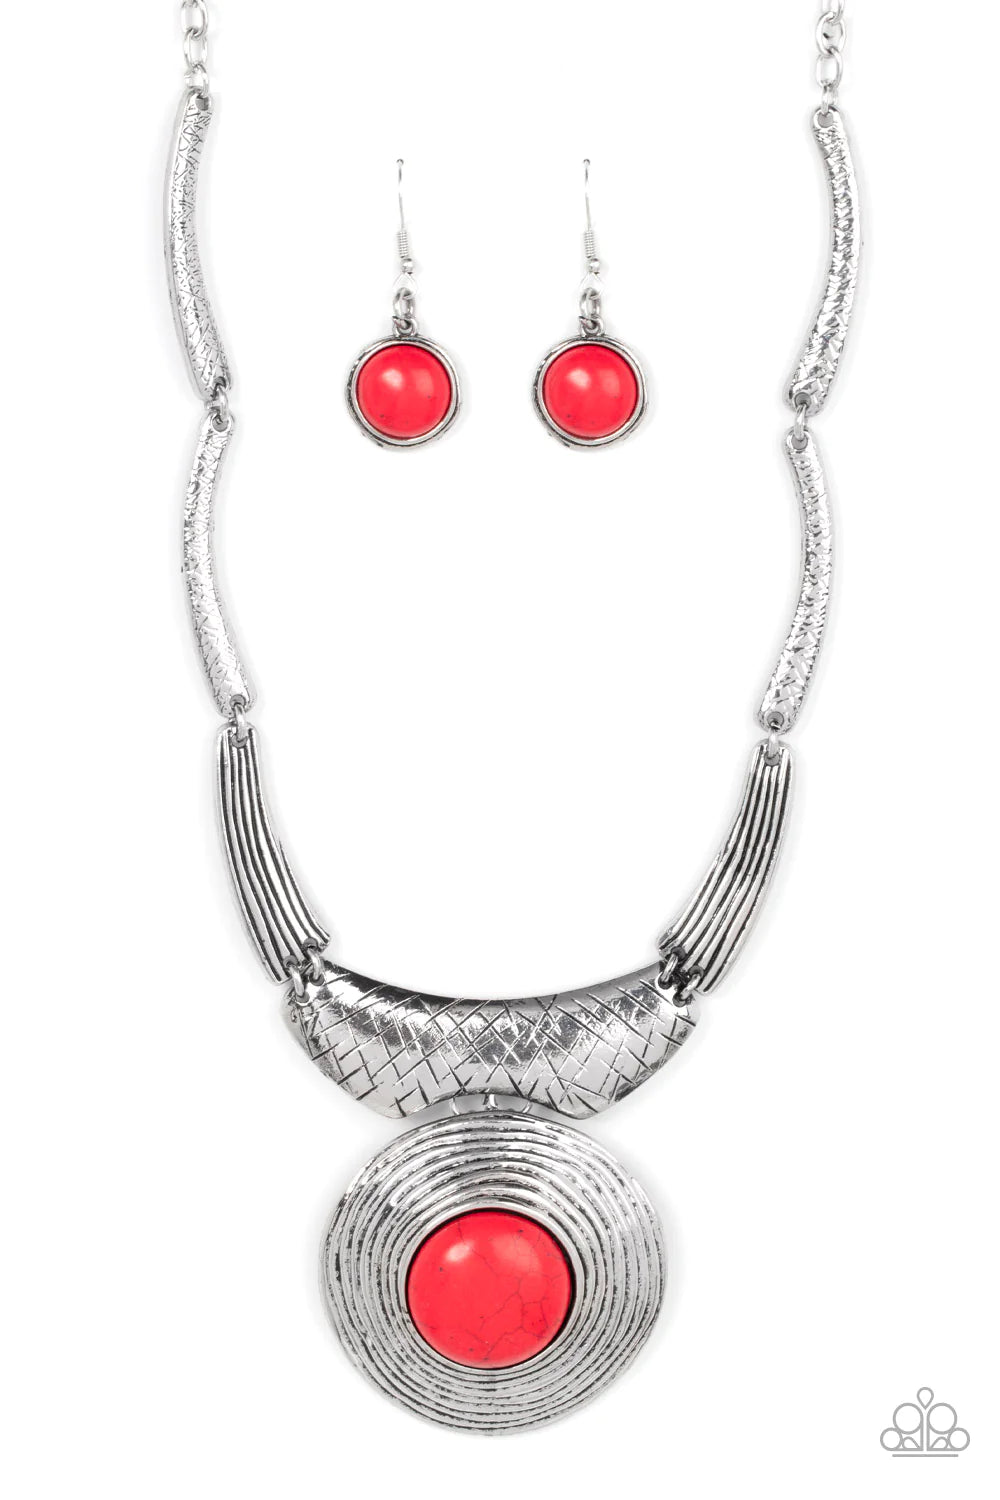 Paparazzi Accessories EMPRESS-ive Resume - Red Featuring hammered, scratched, and linear patterns, an antiqued assortment of gently curving silver frames boldly links below the collar. Dotted with an oversized red stone center, a rustic silver frame radia